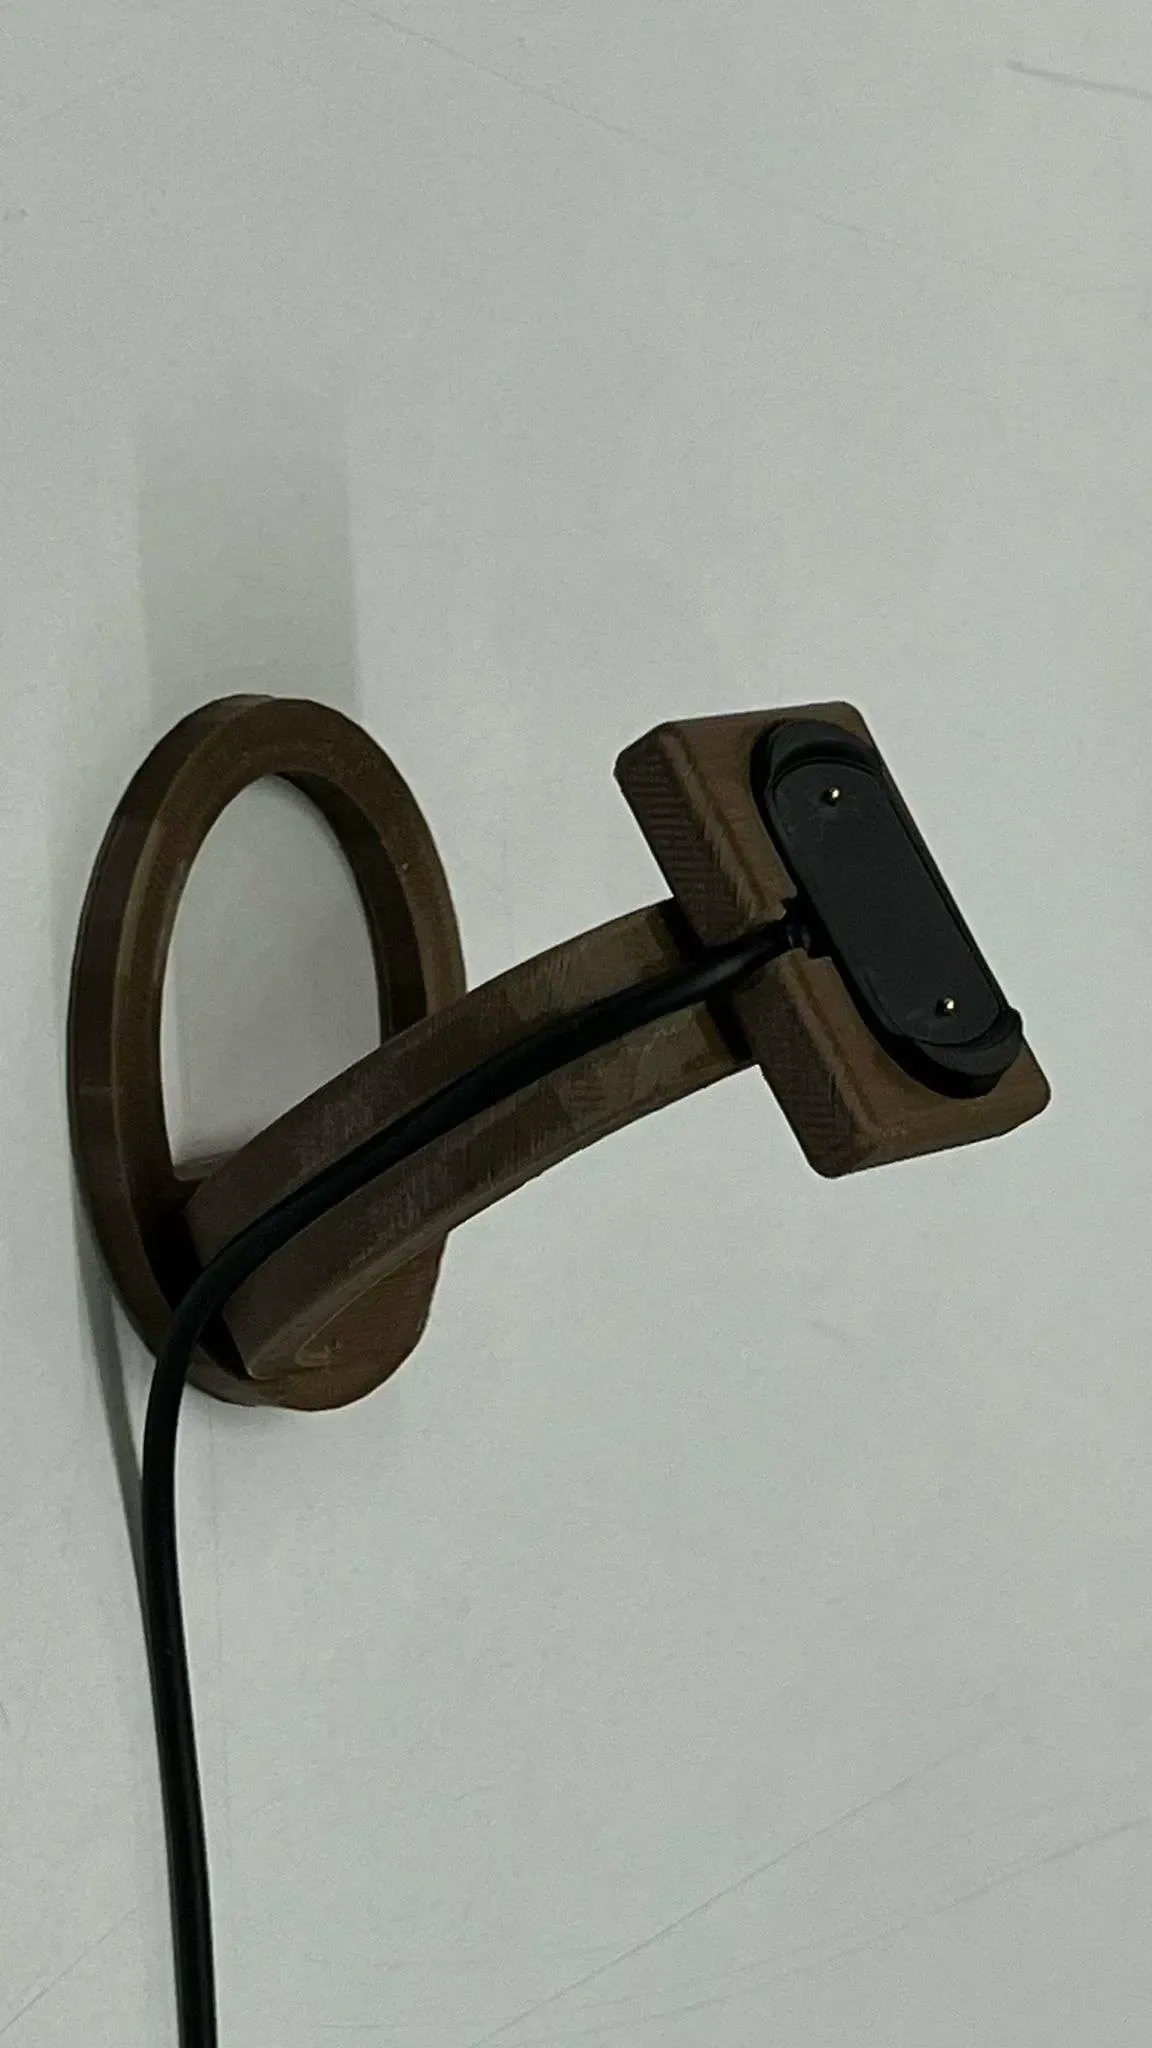 Amazfit T-REX 2 Wall mount Charger